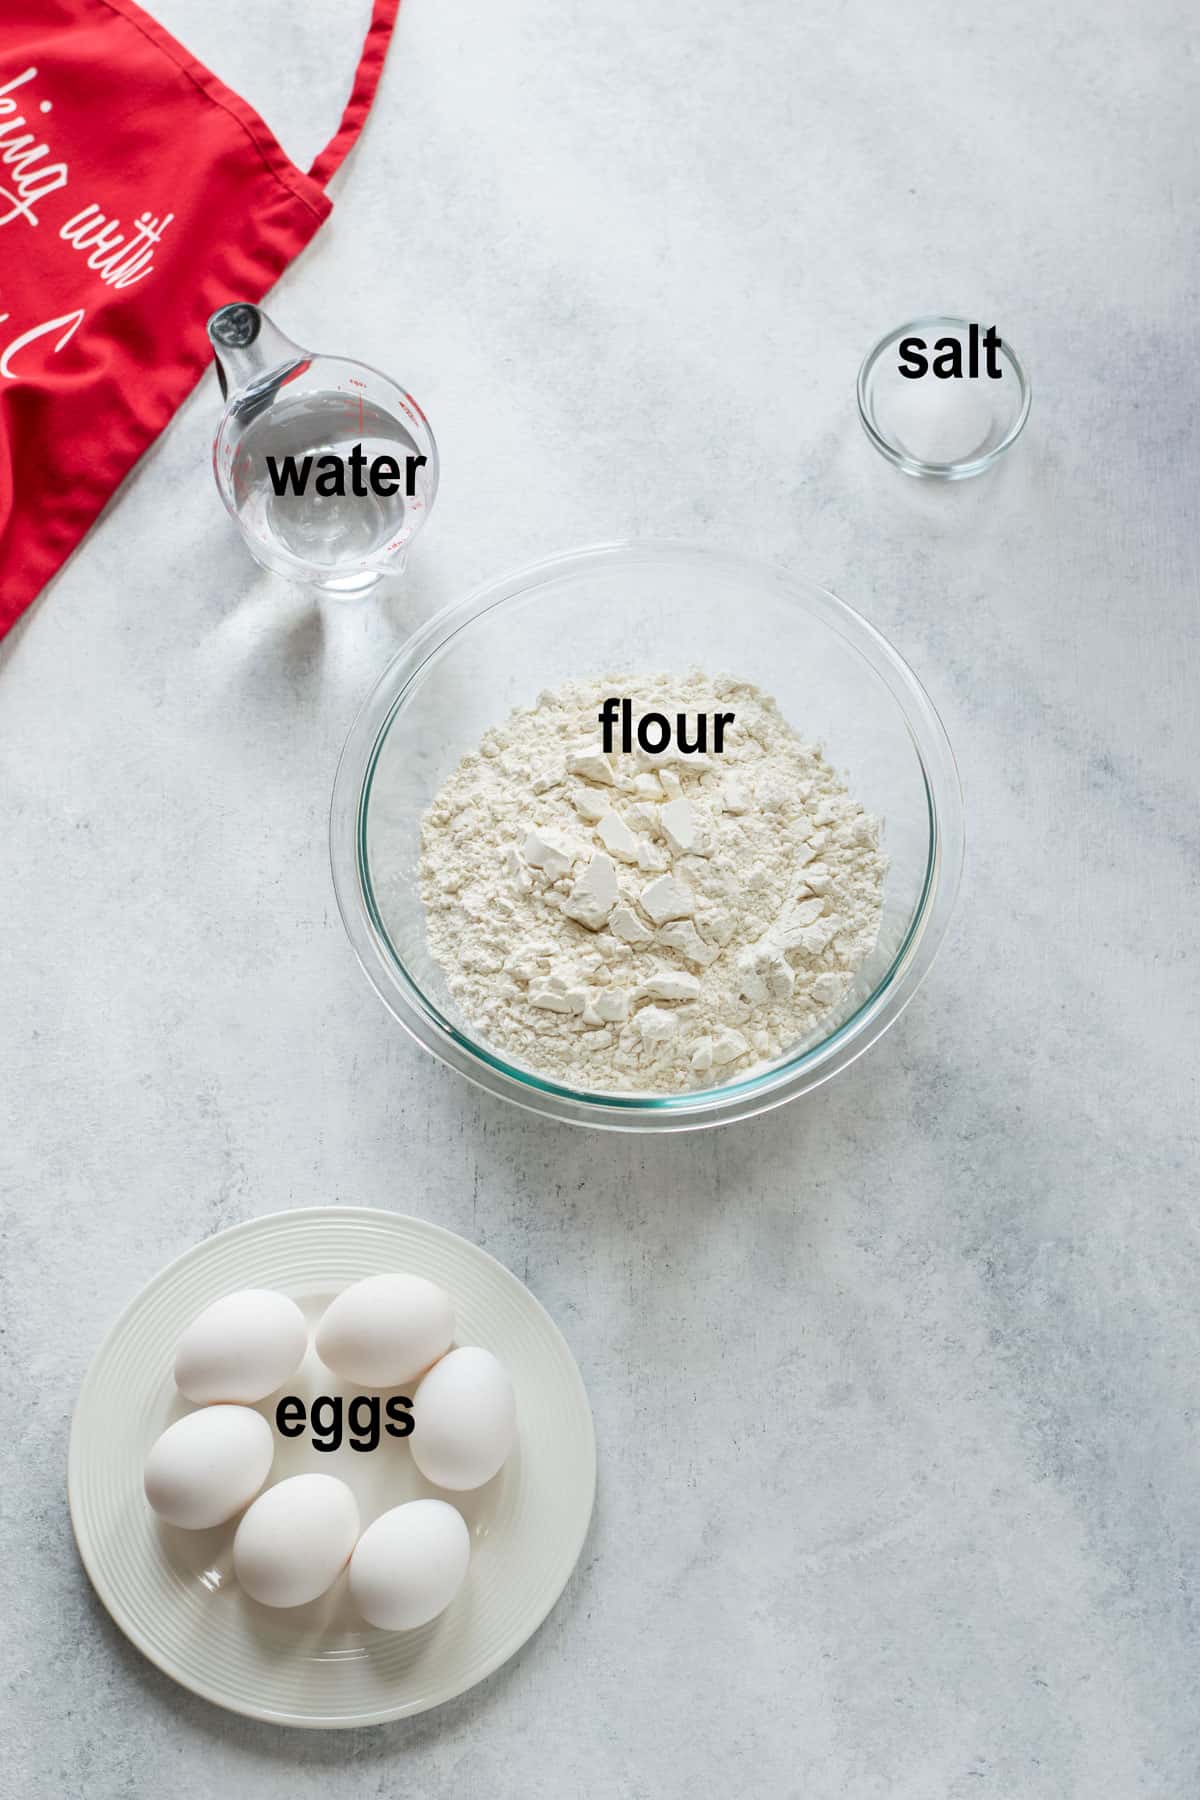 How to Make Dumplings With Flour Water And Eggs 